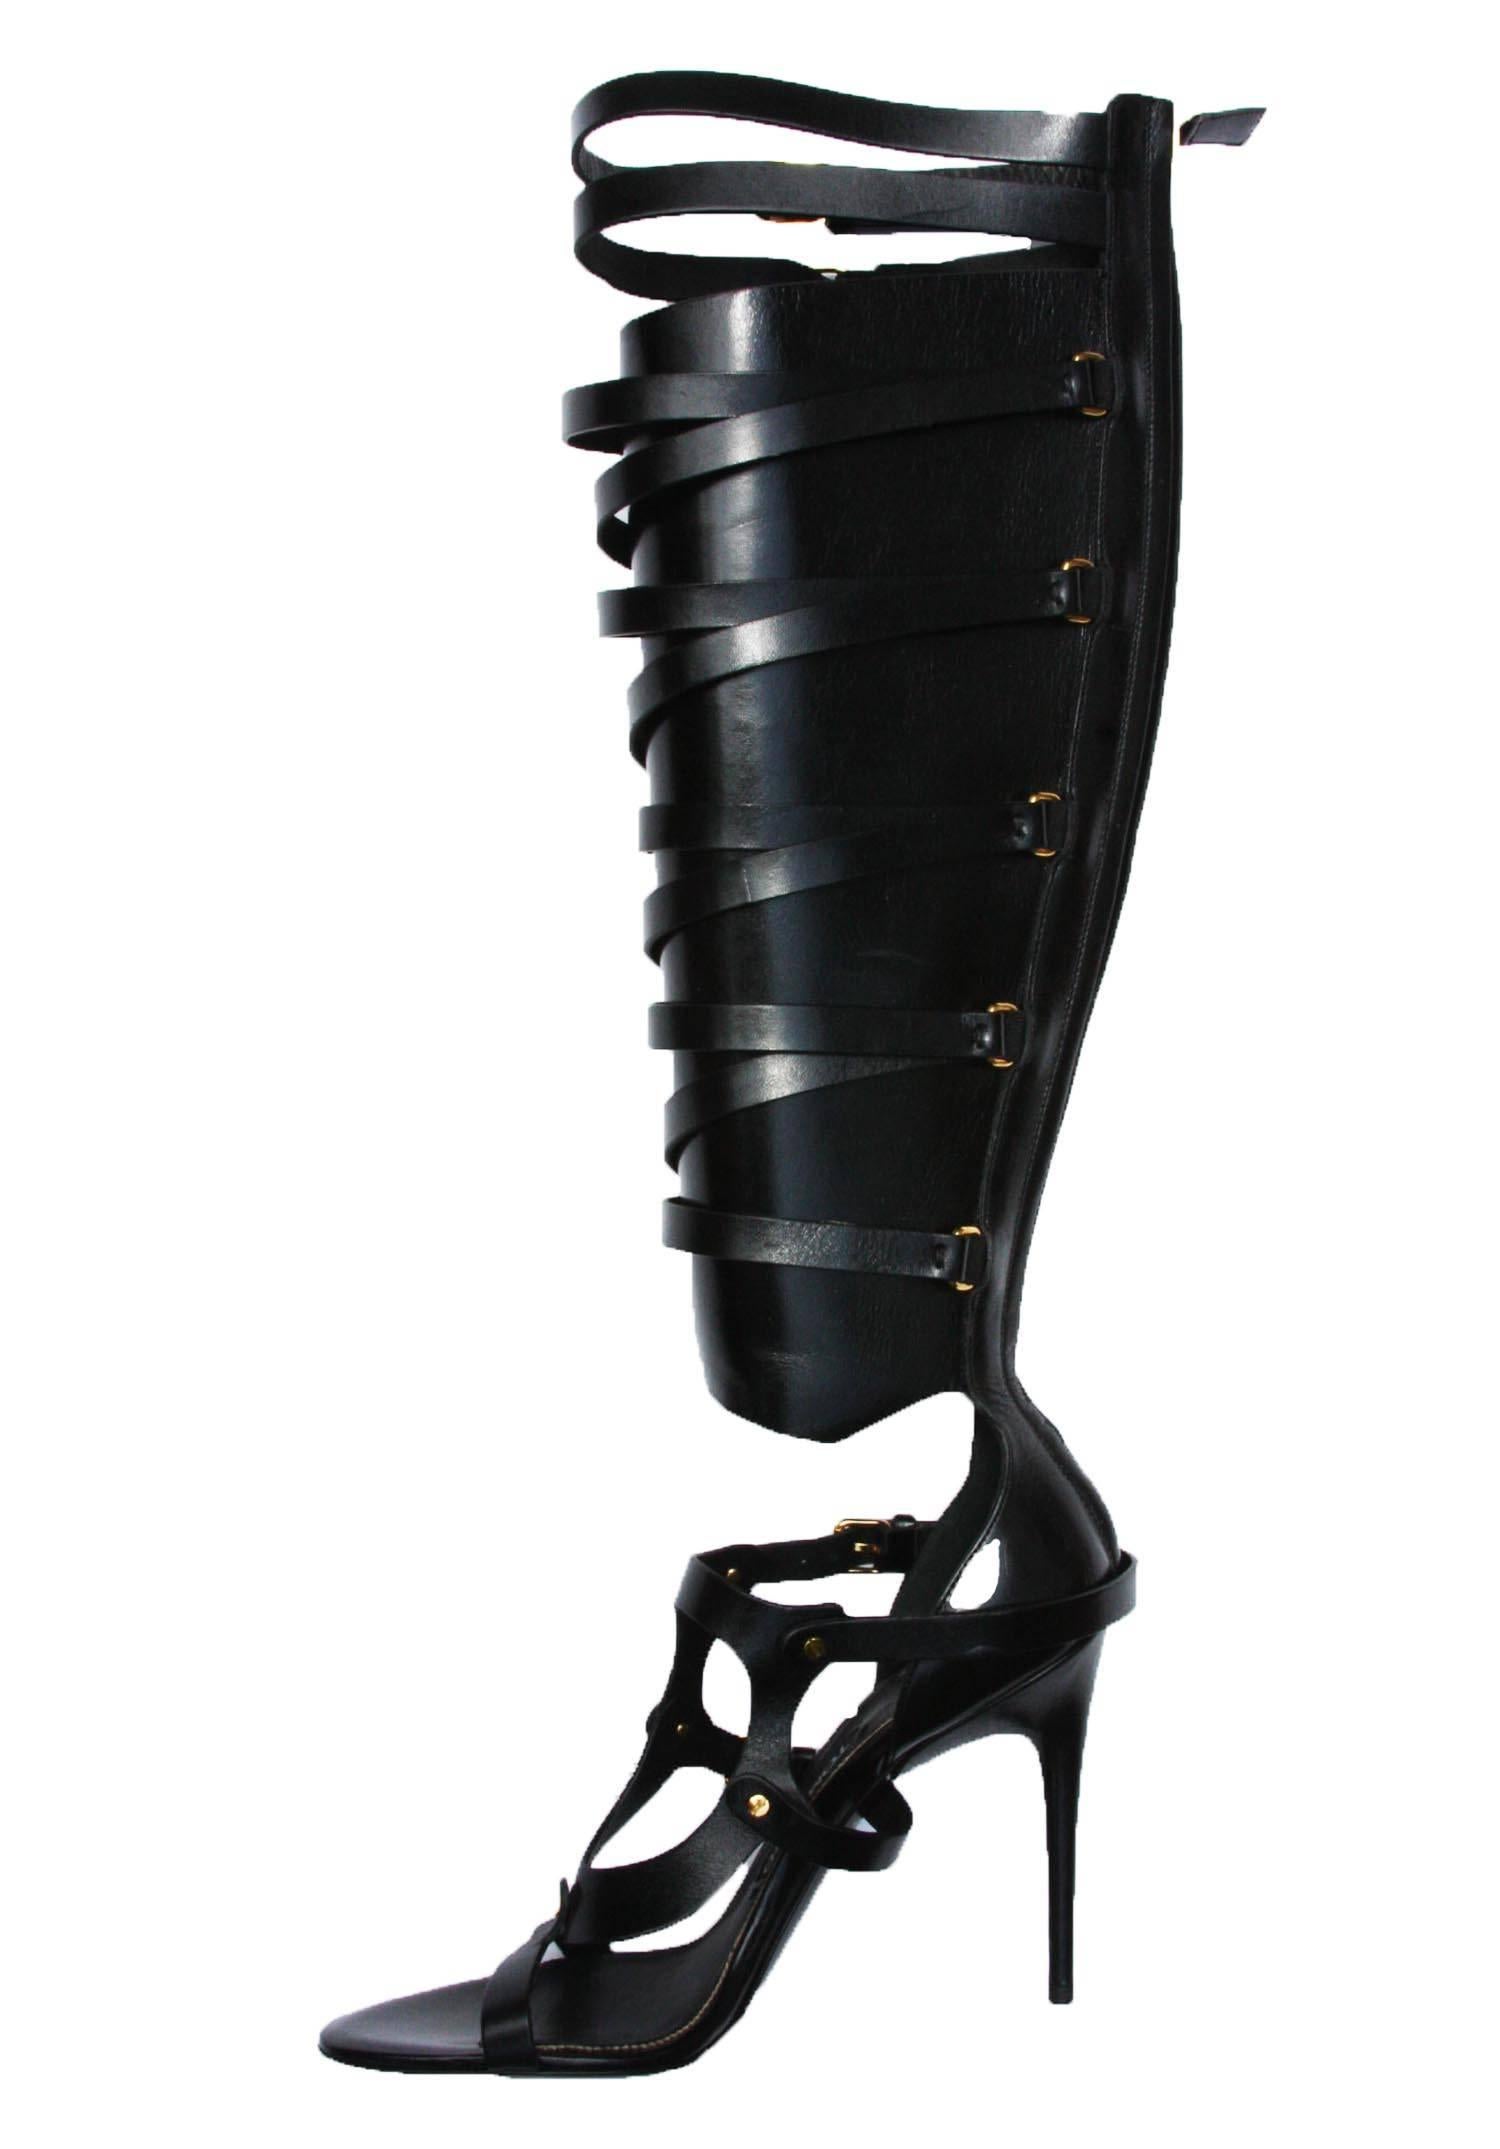 New Tom Ford Black Strappy Buckled Gladiator Sandal Boots

Italian size 39.5

100 % Leather.

Golden hardware.

Buckled straps wrap around the shaft.

Open toe.

Back zip.

4 1/4